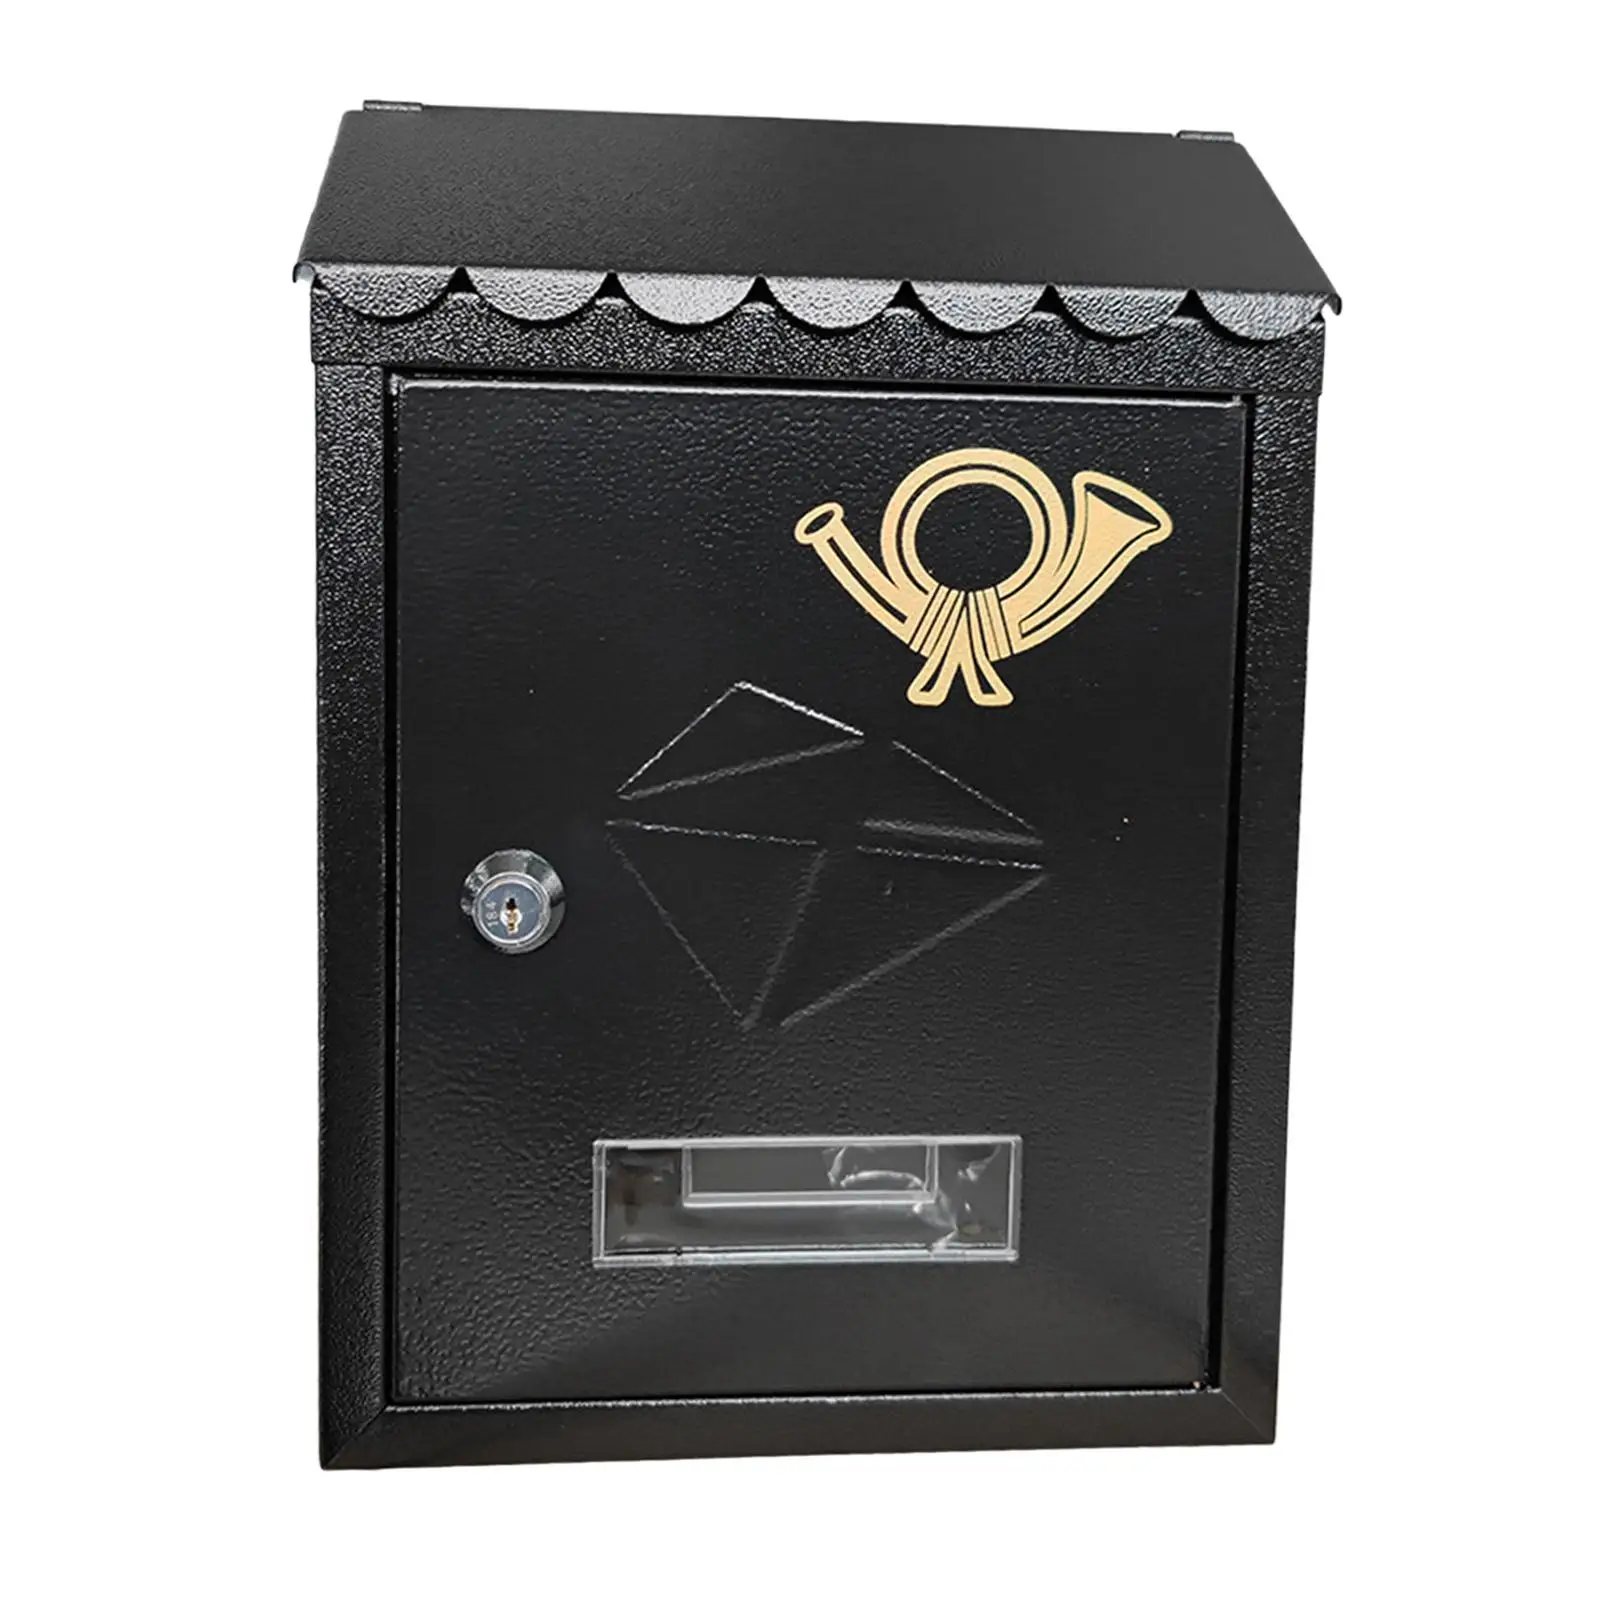 Wall Mount Mailbox Decorations Locking Decorative 21.5x7x30cm Outdoor Commercial Use with Key Front Door Metal Drop Box Mail Box